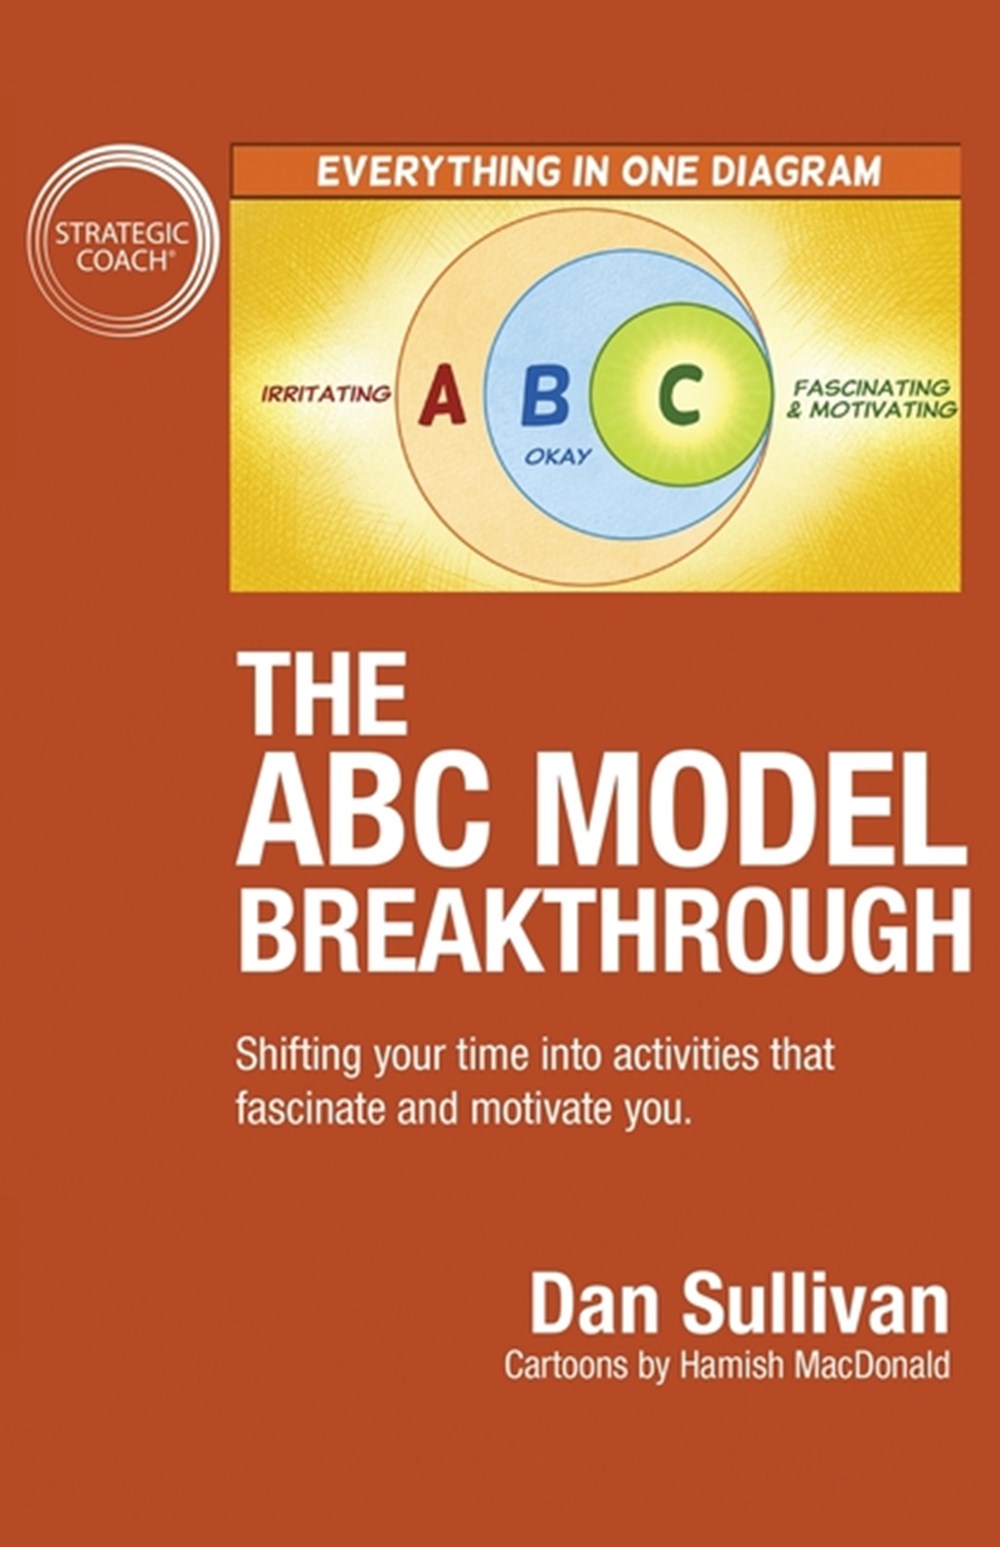 ABC Model Breakthrough Shifting your time into activities that fascinate and motivate you.